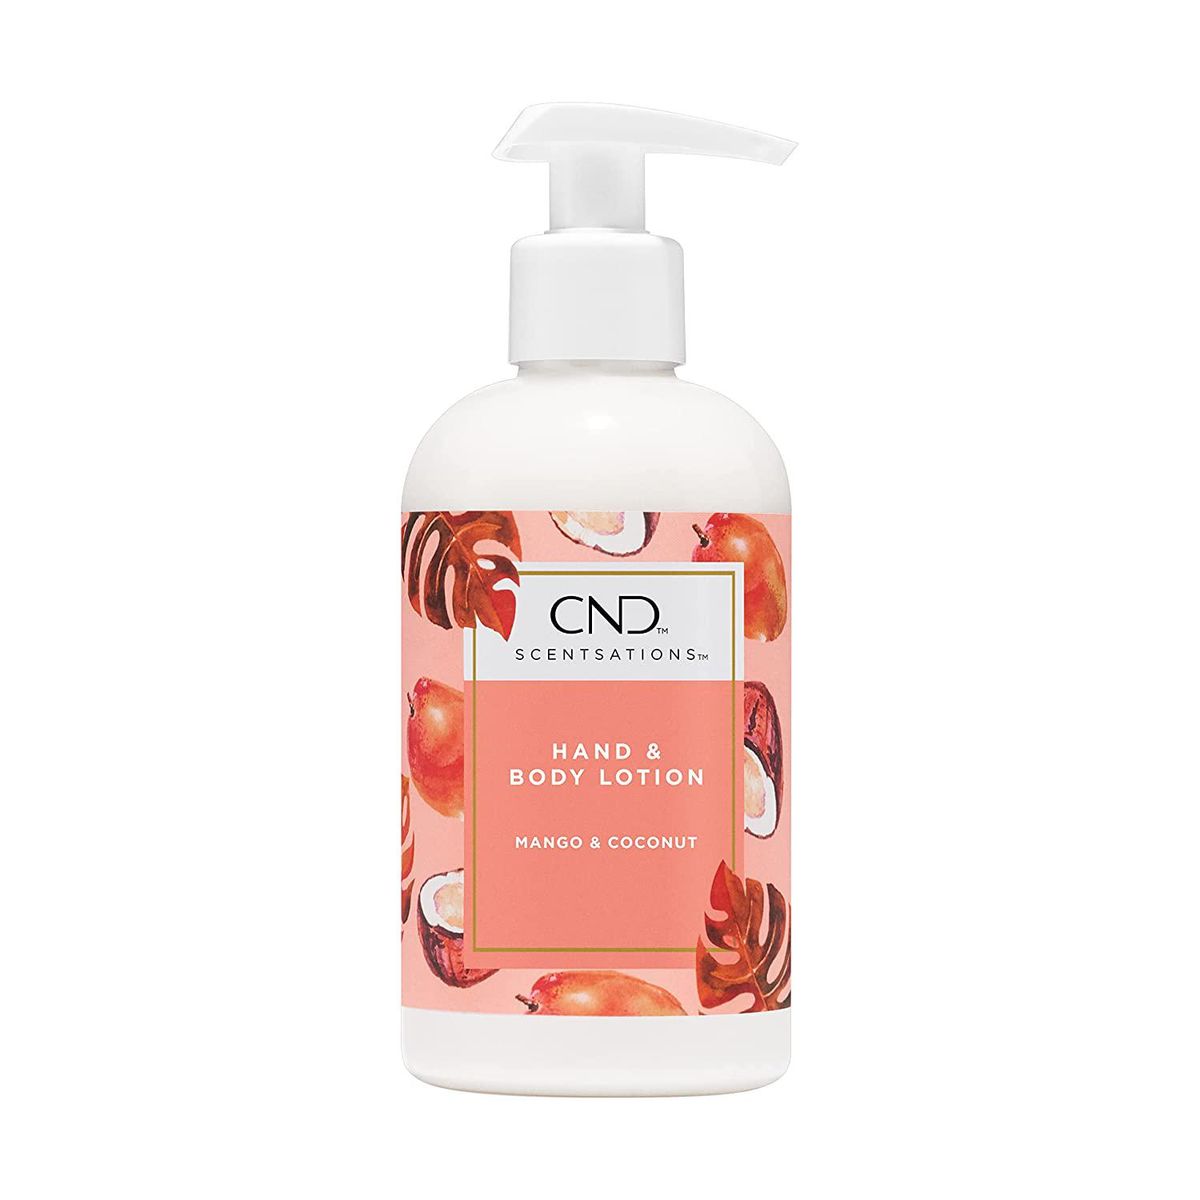 Scentsations Hand and Body Lotion